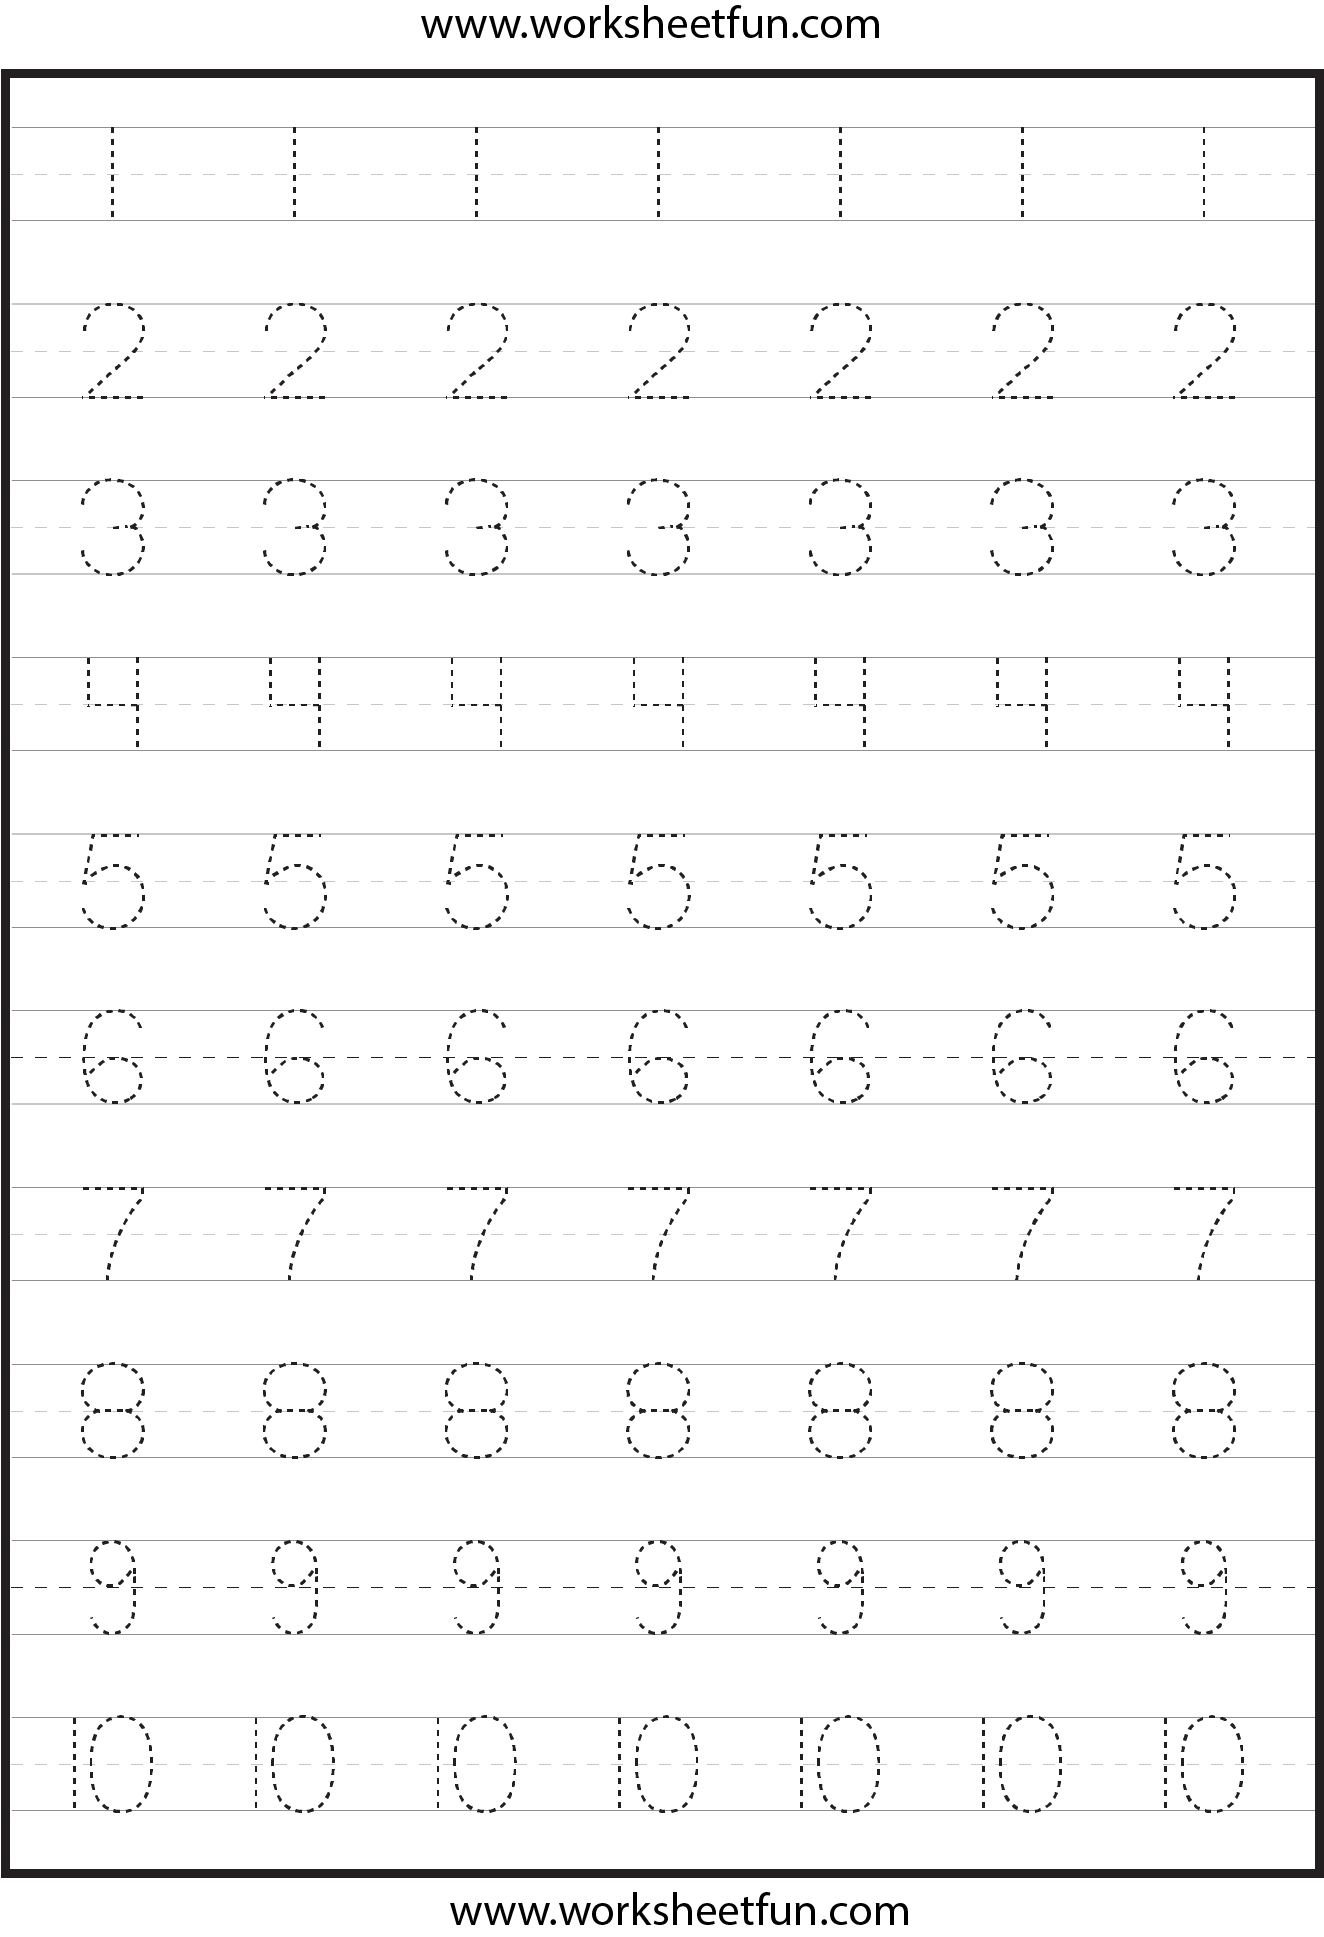 8-best-images-of-follow-the-lines-pattern-worksheet-printable-numbers